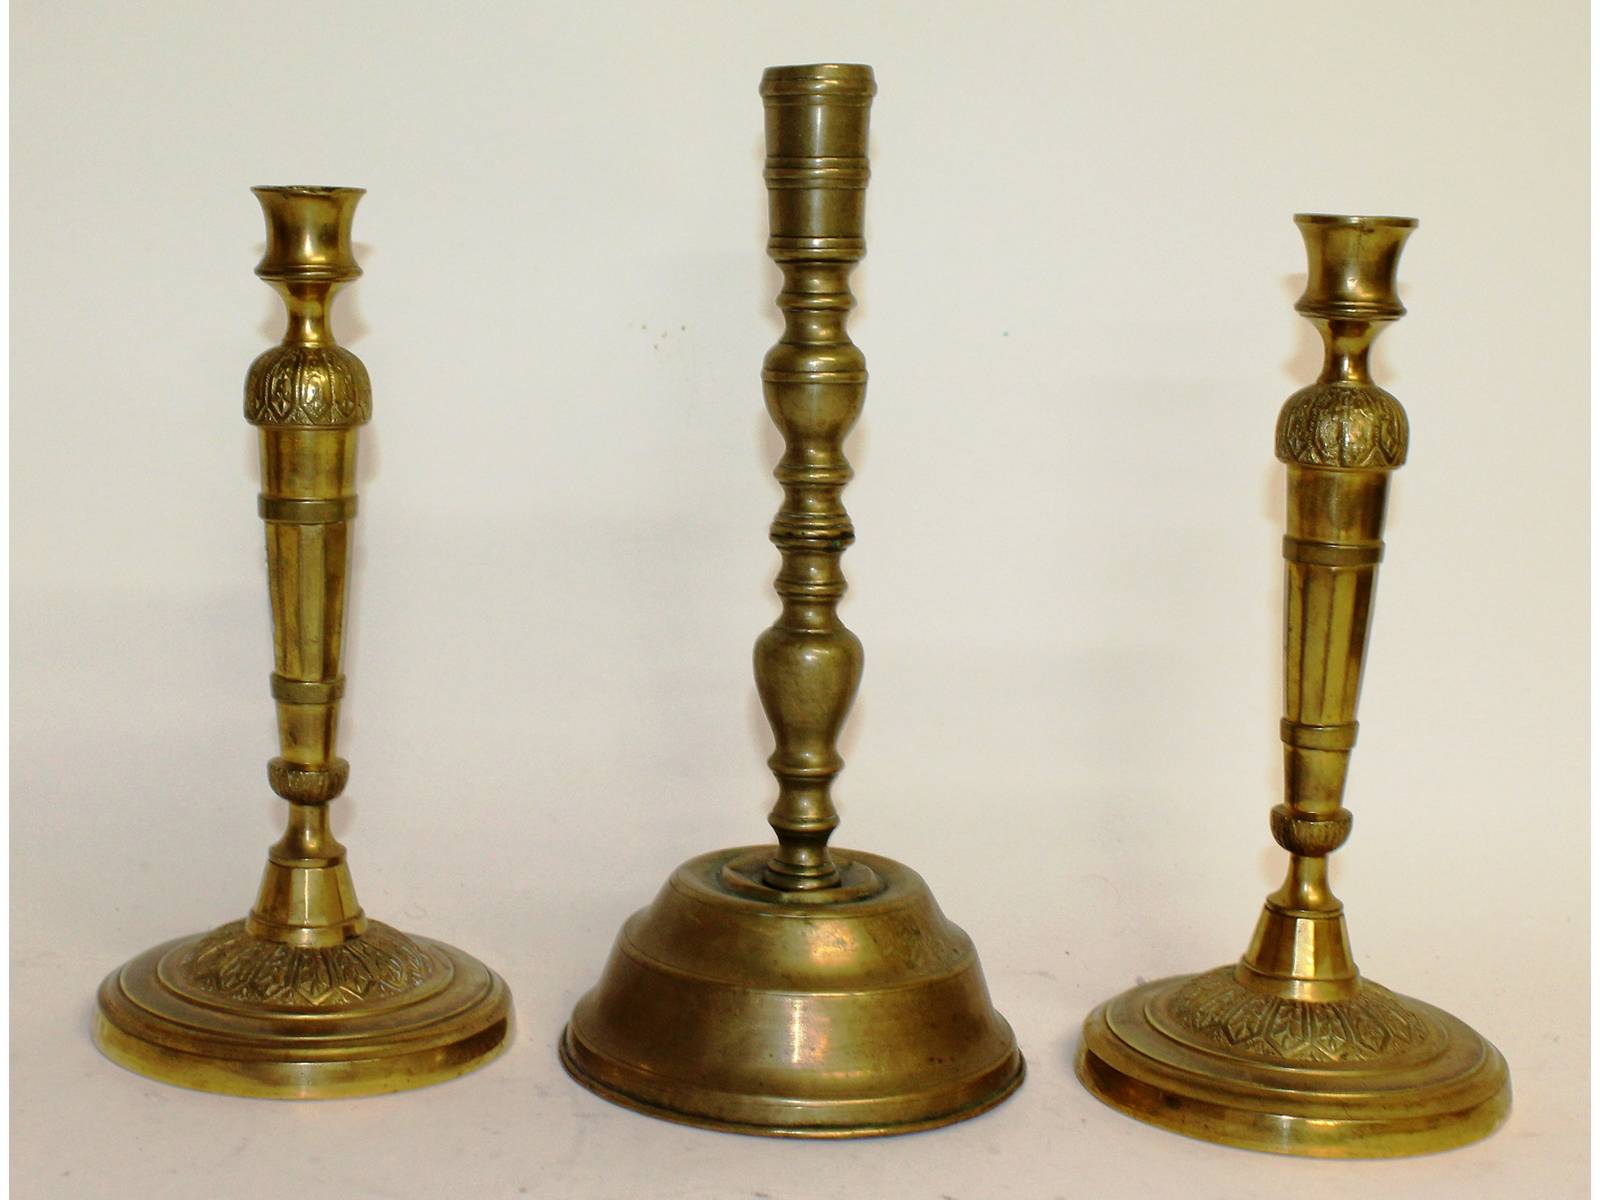 A good pair of 18th-19th century French ormolu circular candlesticks, 10.5ins high, and a large